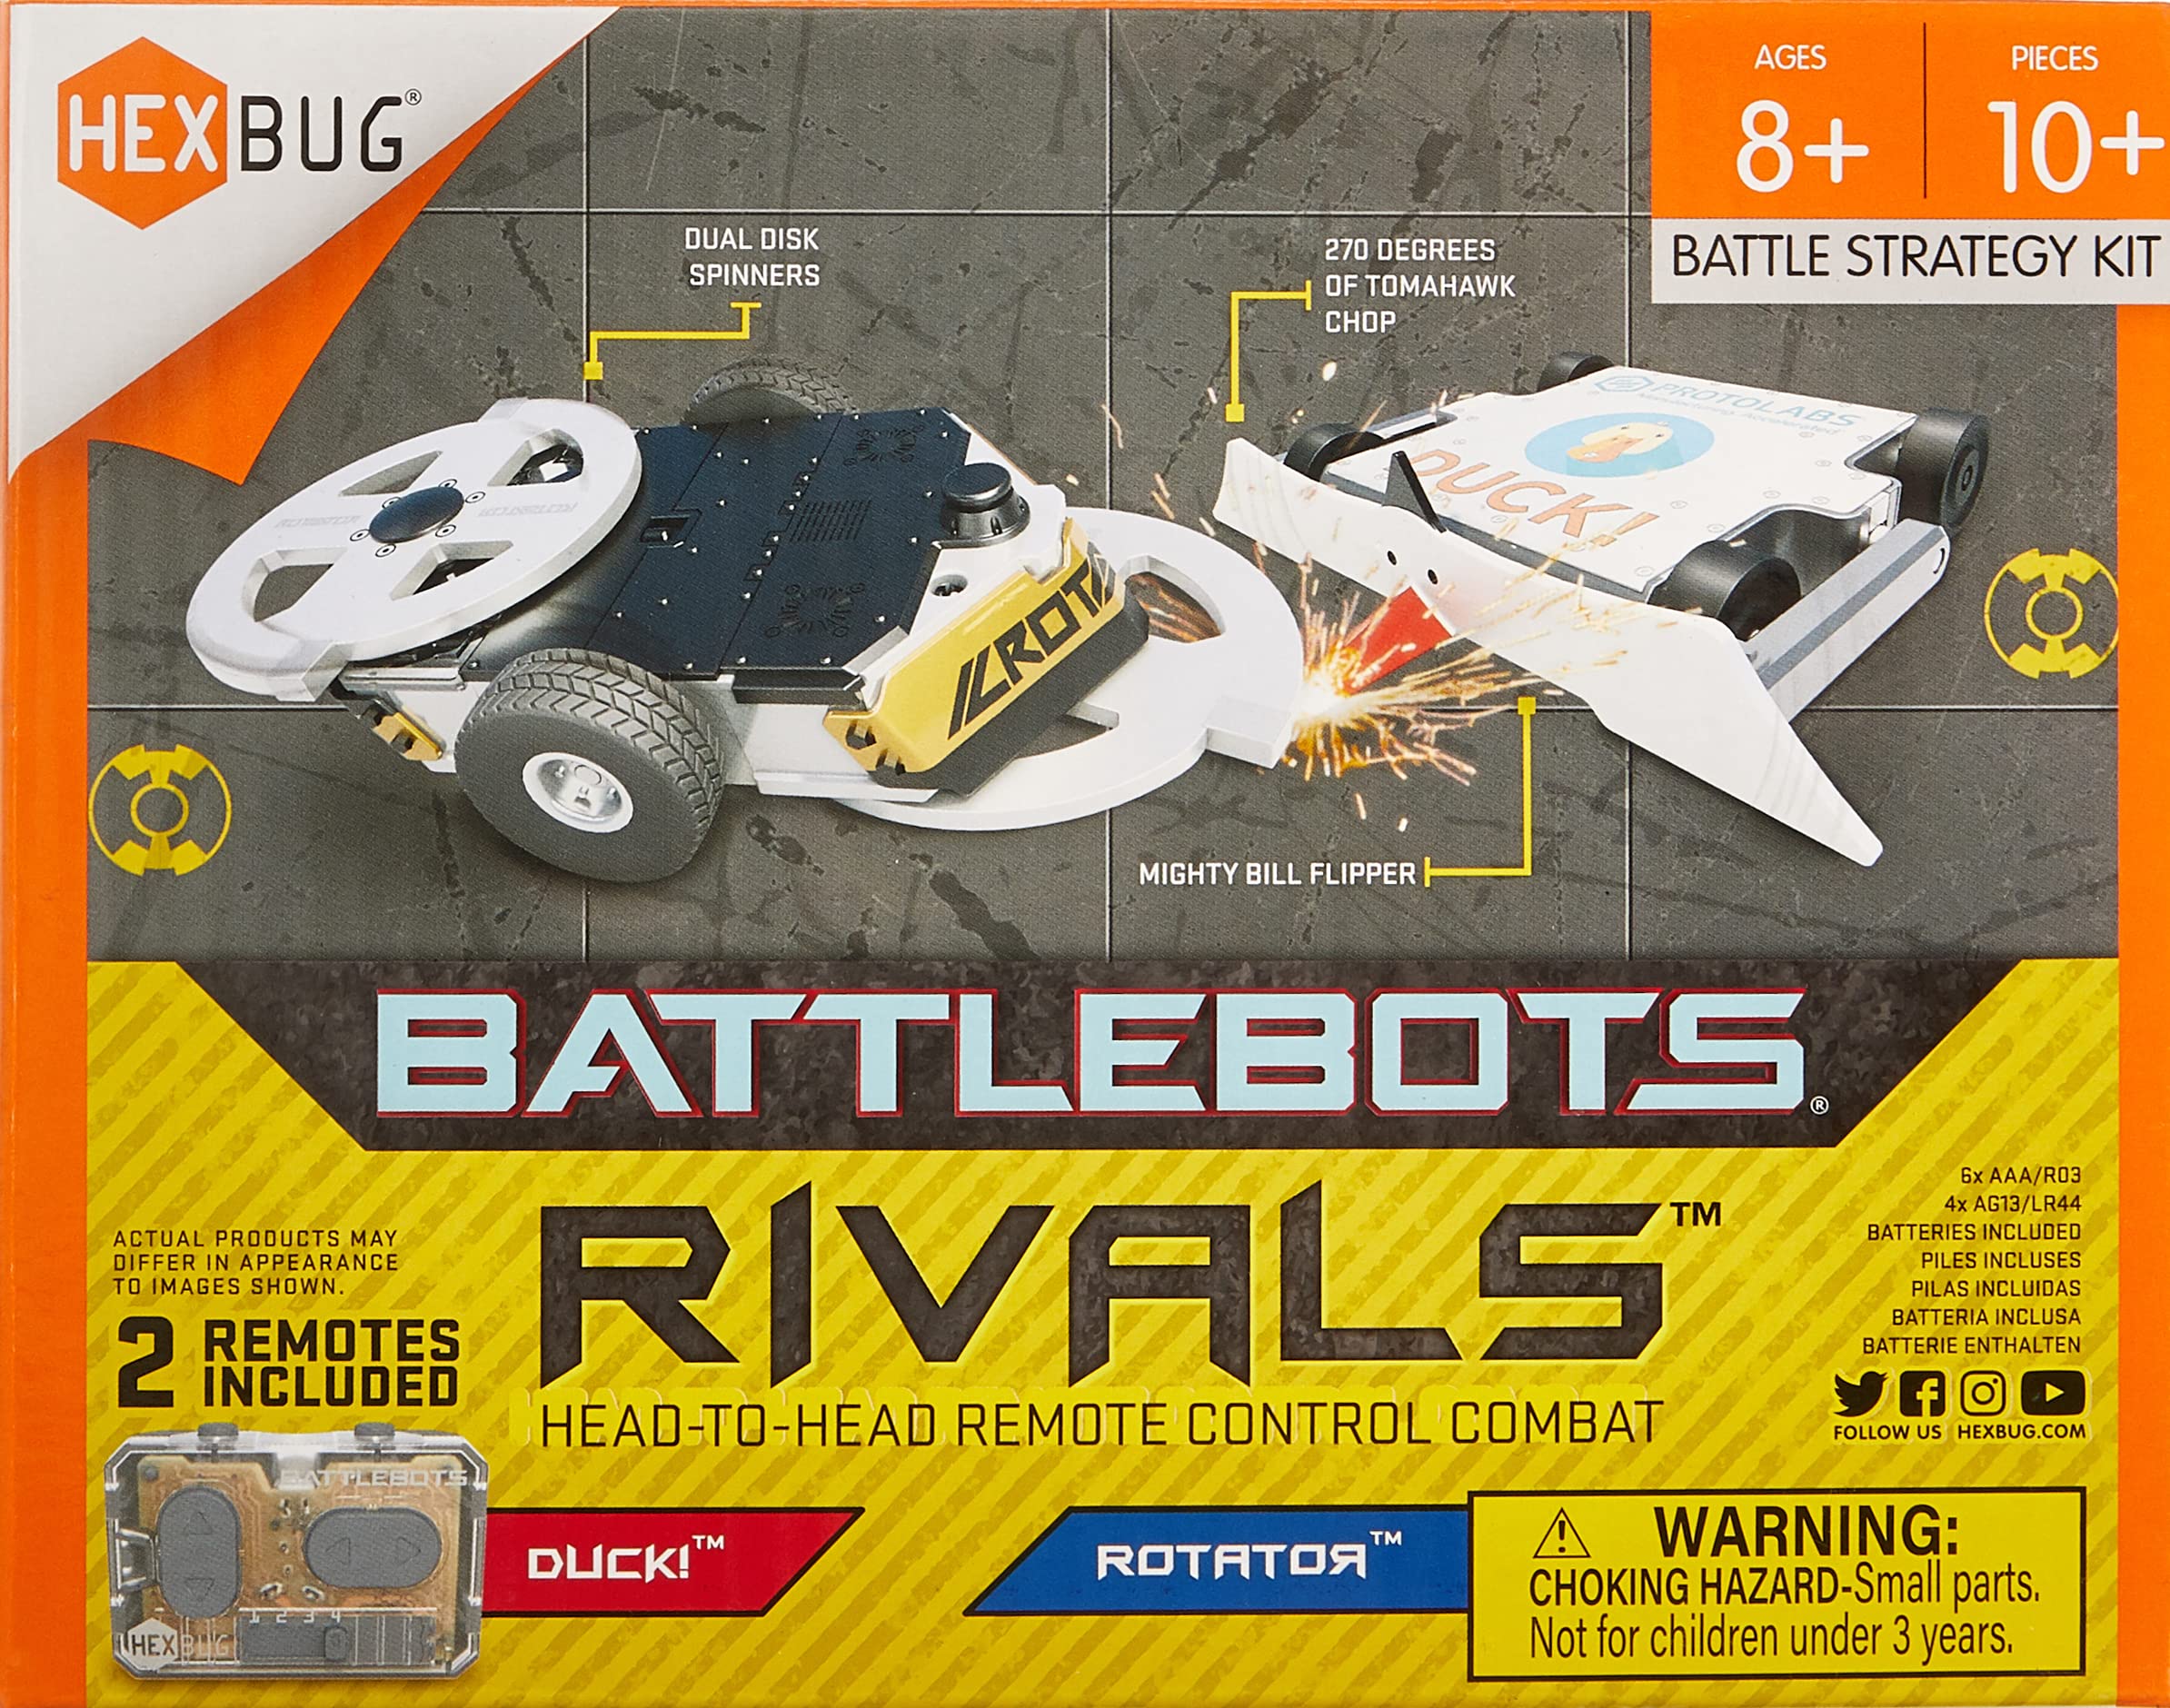 HEXBUG BattleBots Rivals 5.0 (Rotator and Duck), Remote Control Robot Toys for Kids, STEM Toys for Boys and Girls Ages 8 & Up, Batteries Included